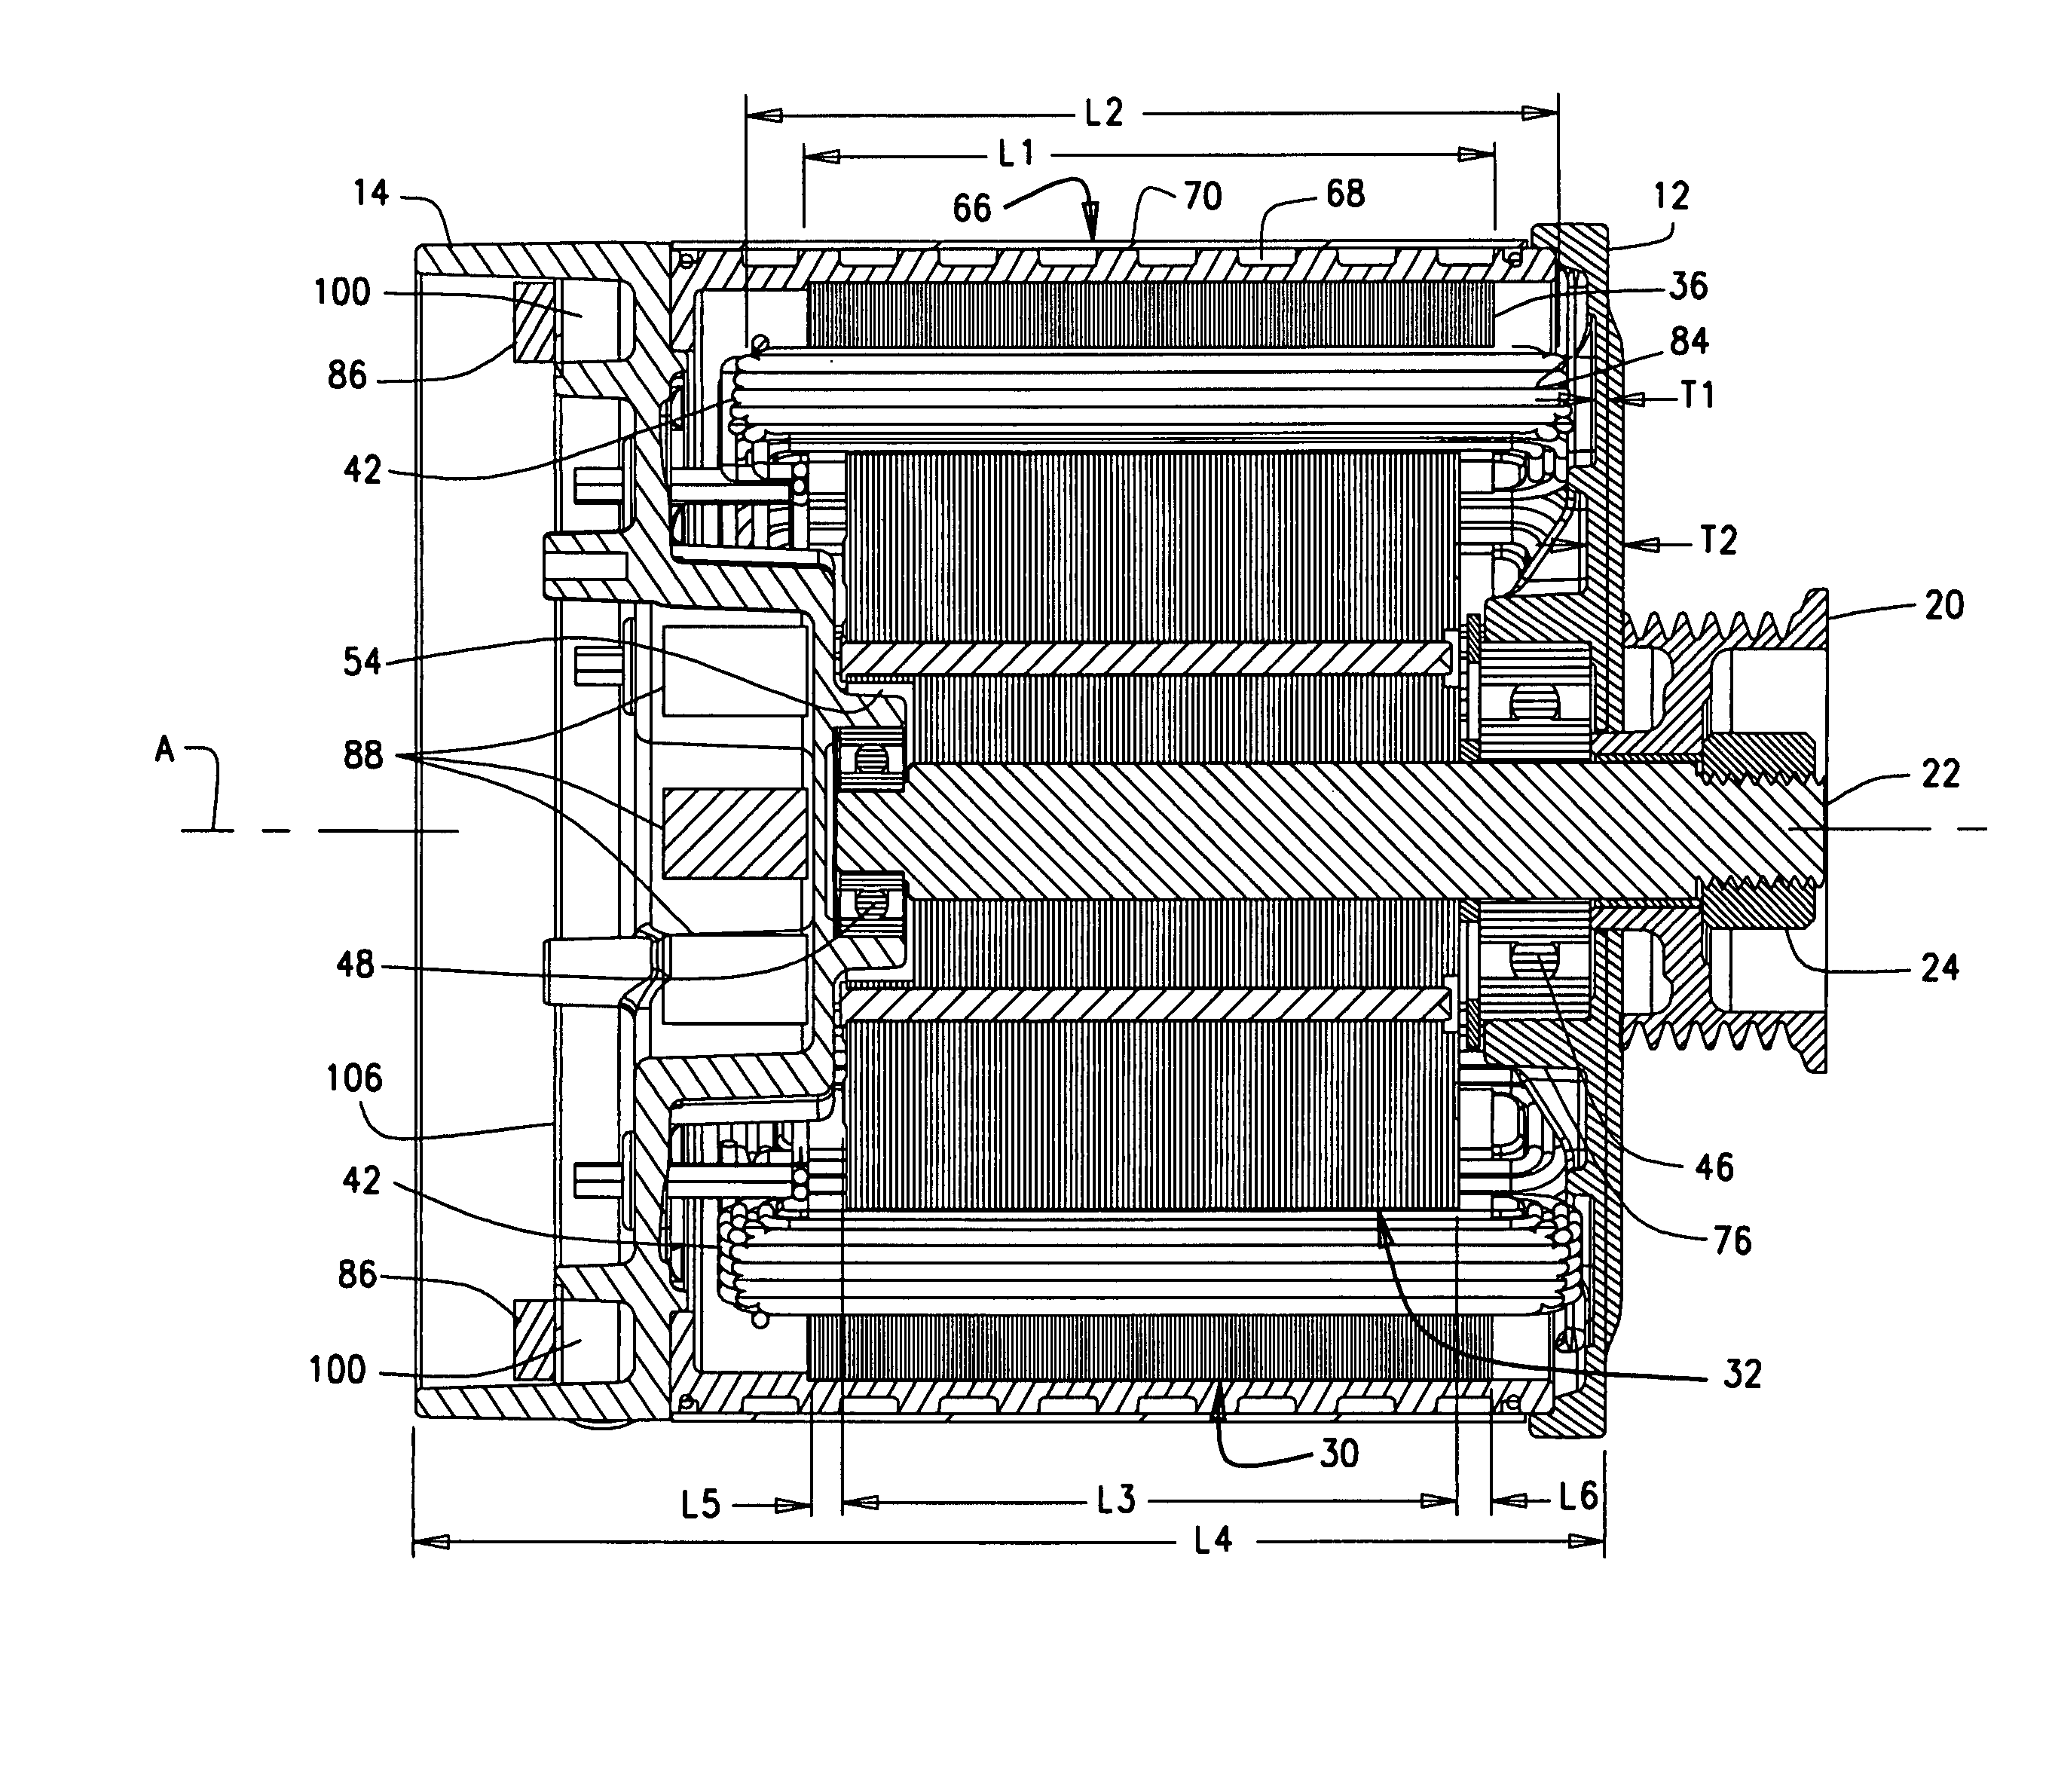 Compact dynamoelectric machine